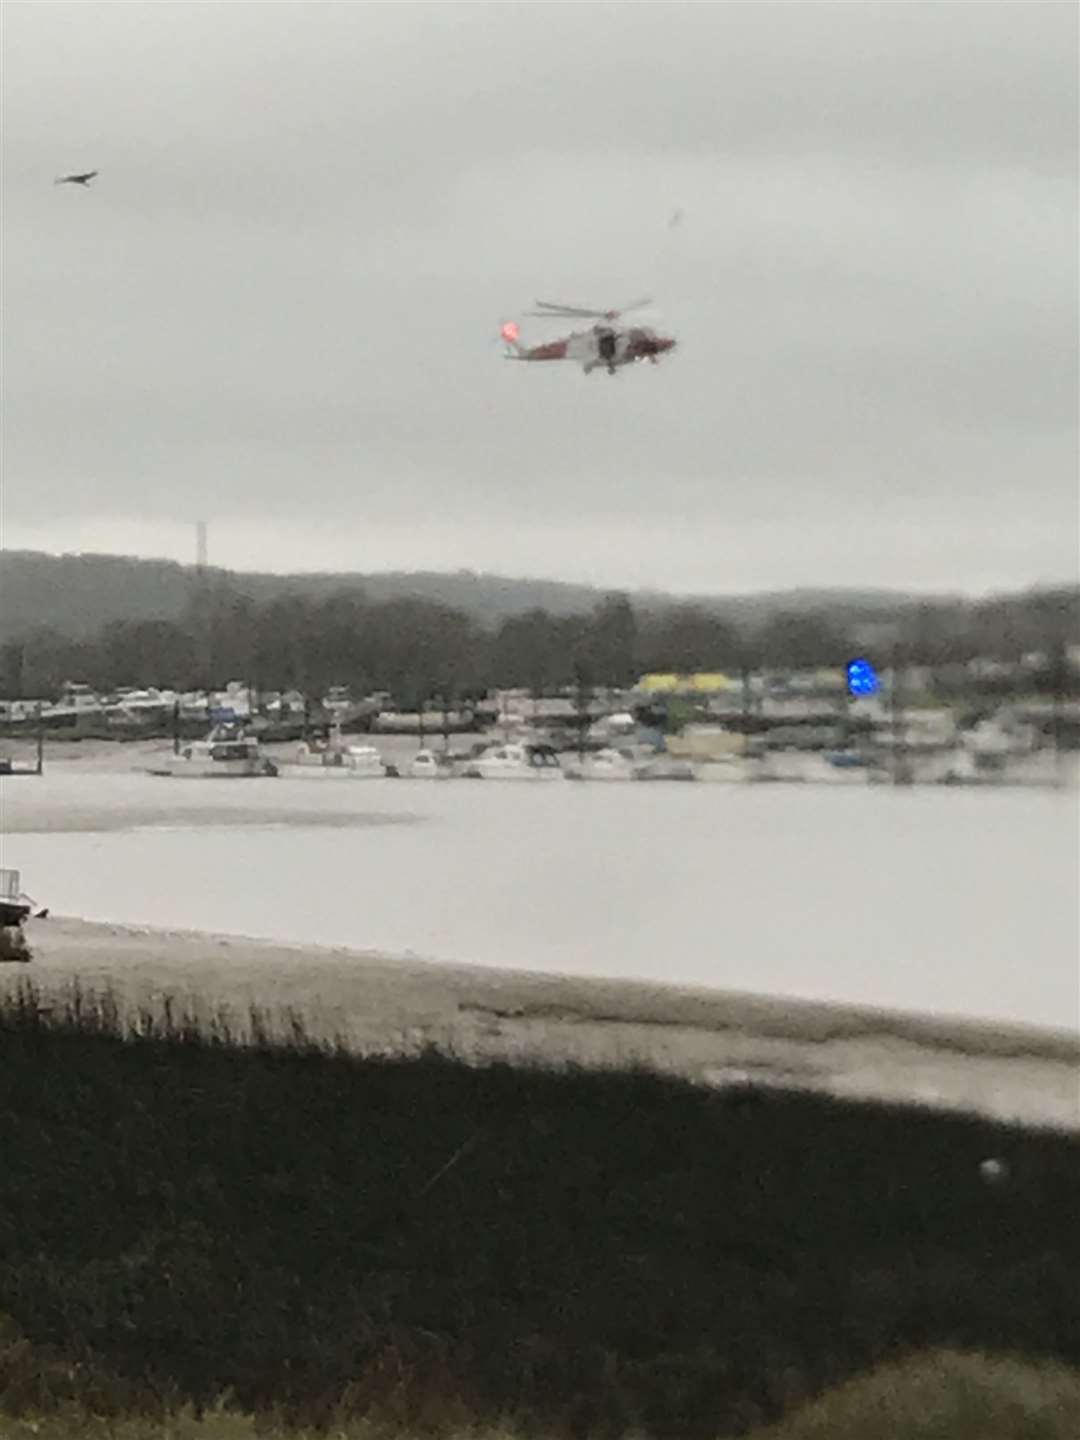 The coastguard helicopter and emergency teams have been called to the area near the M2 bridge and have been spotted searching at Cuxton Marina